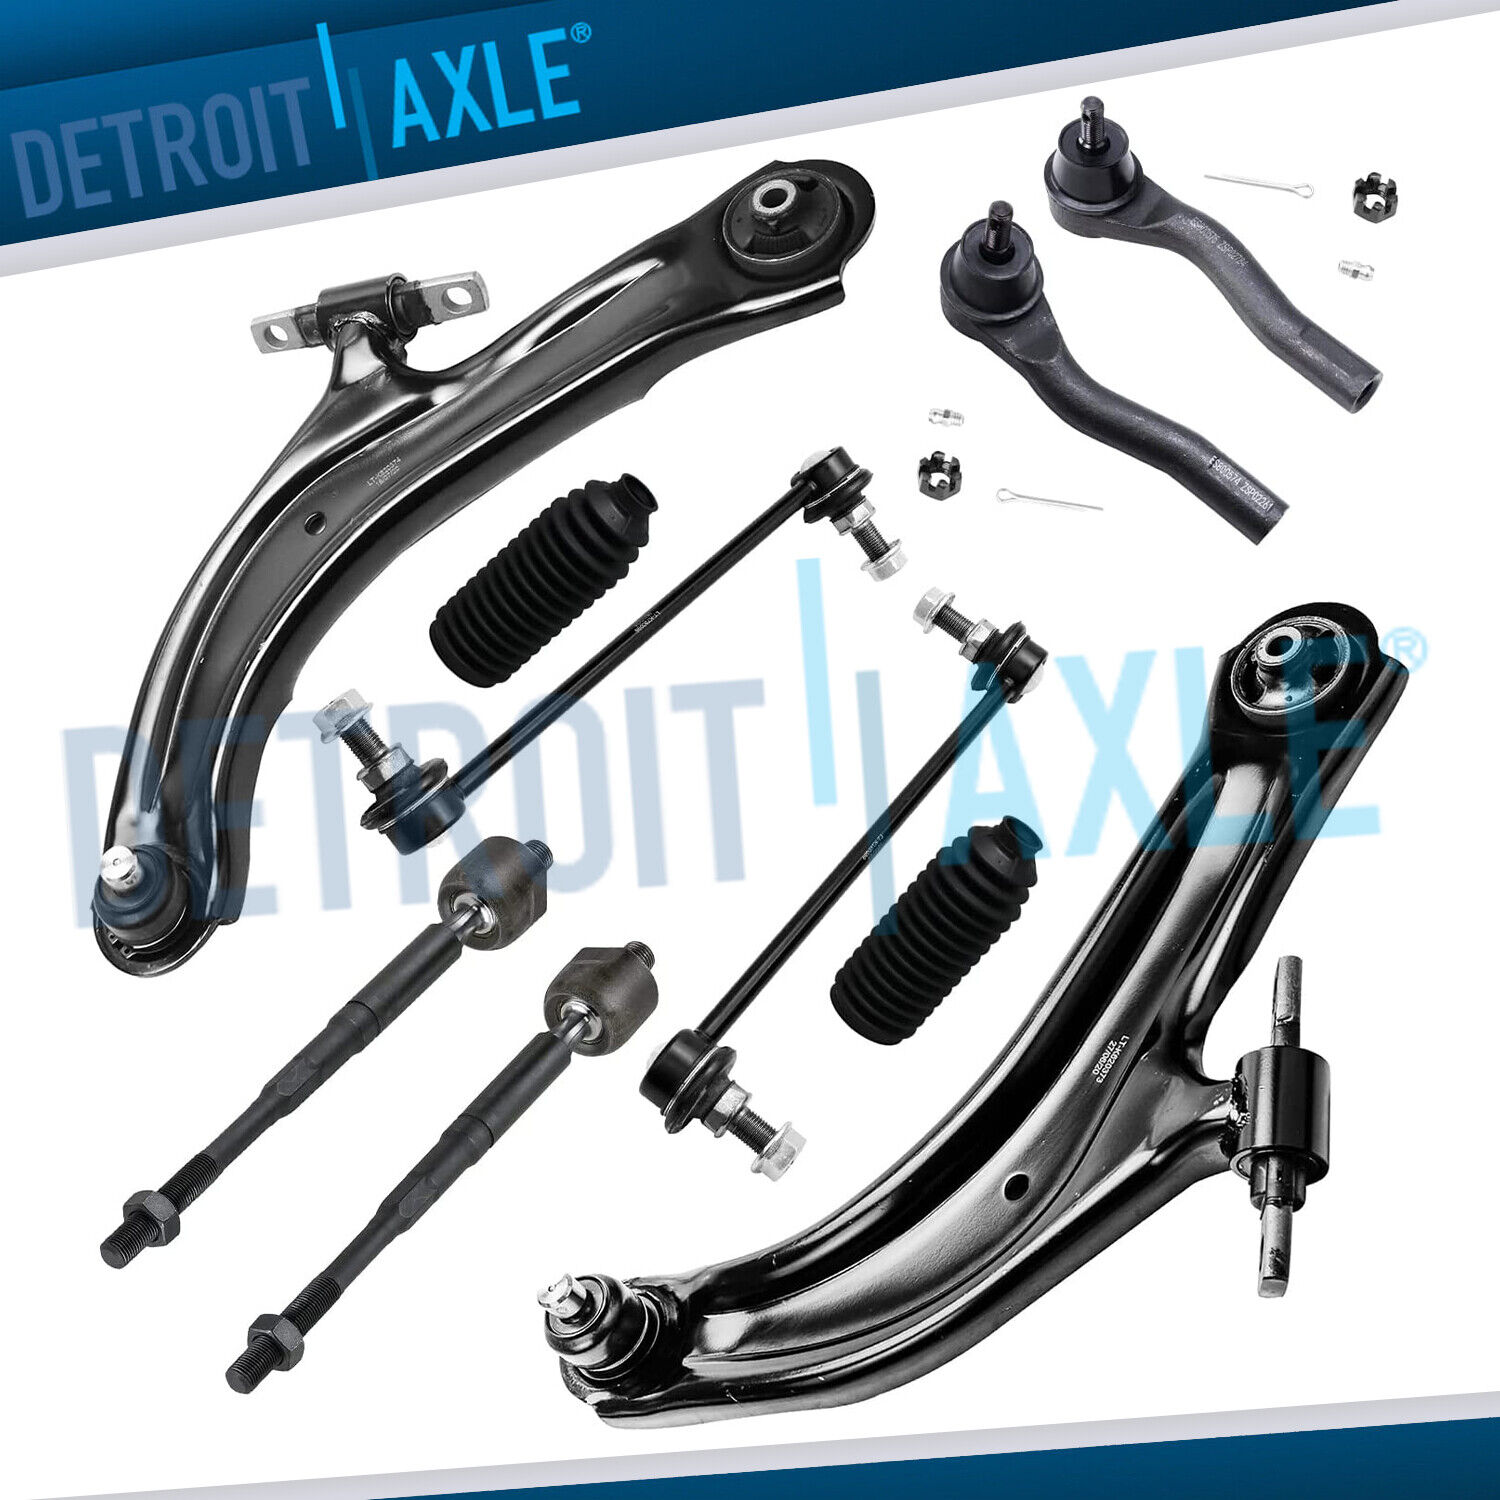 10pc Front Lower Control Arm + Tie Rod + Sway Bar for 2007-2012